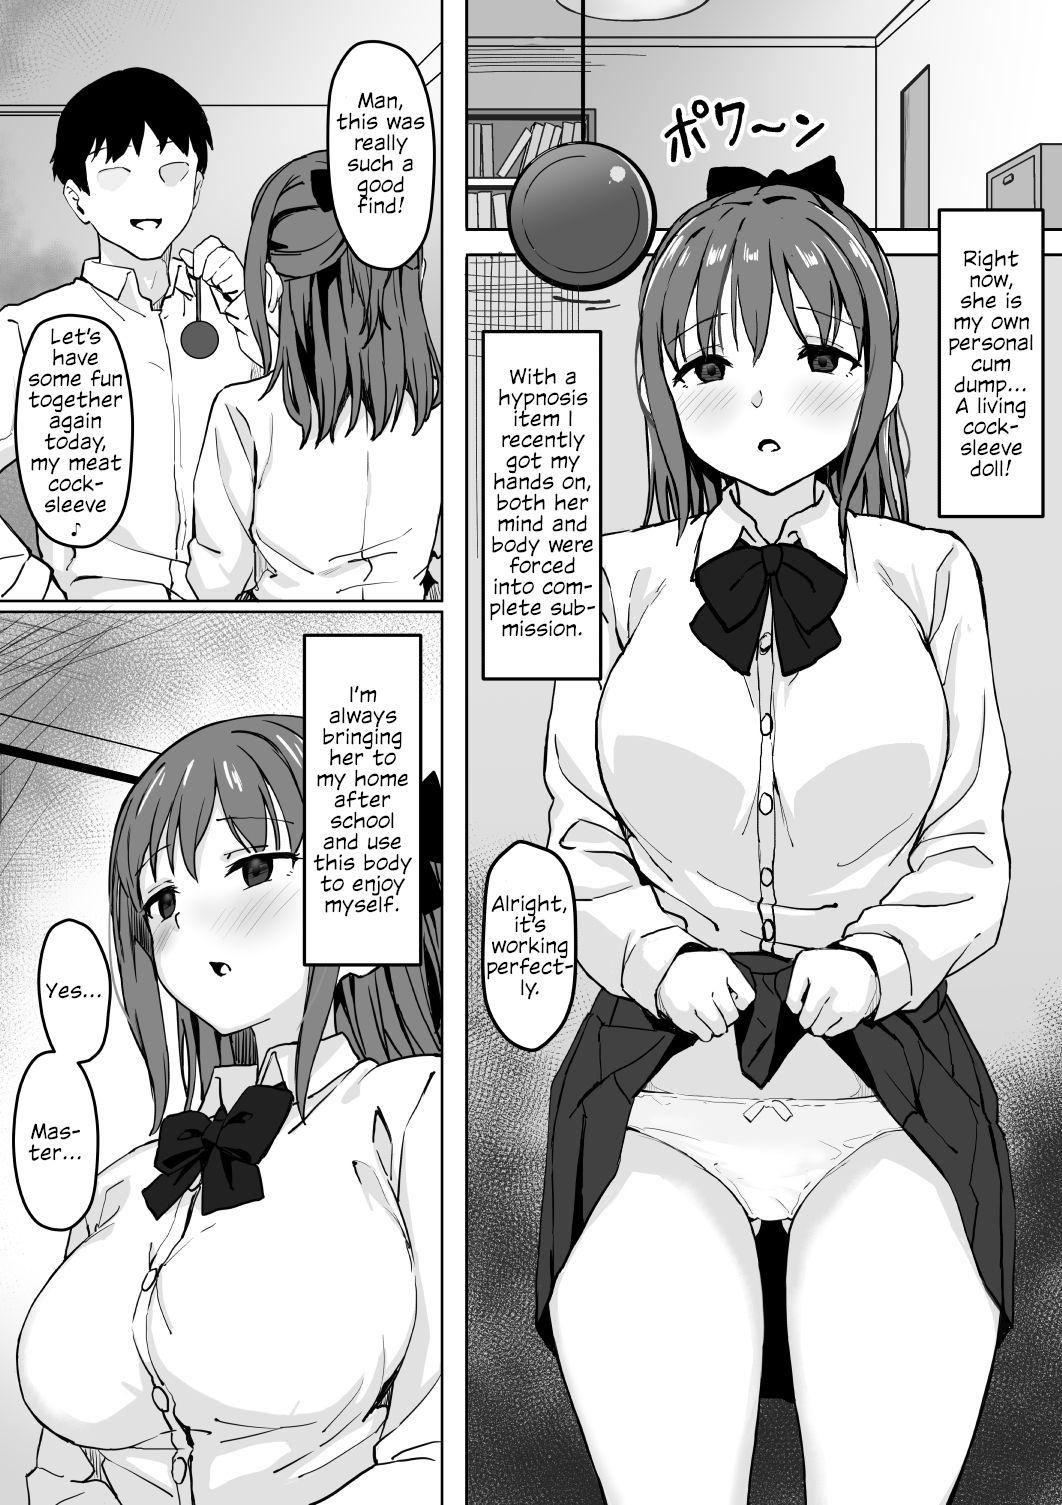 Leather Saimin Nama Onaho de Asobo. | Let's Play With A Hypnotized Living Cocksleeve. - Original Gay Uniform - Page 5